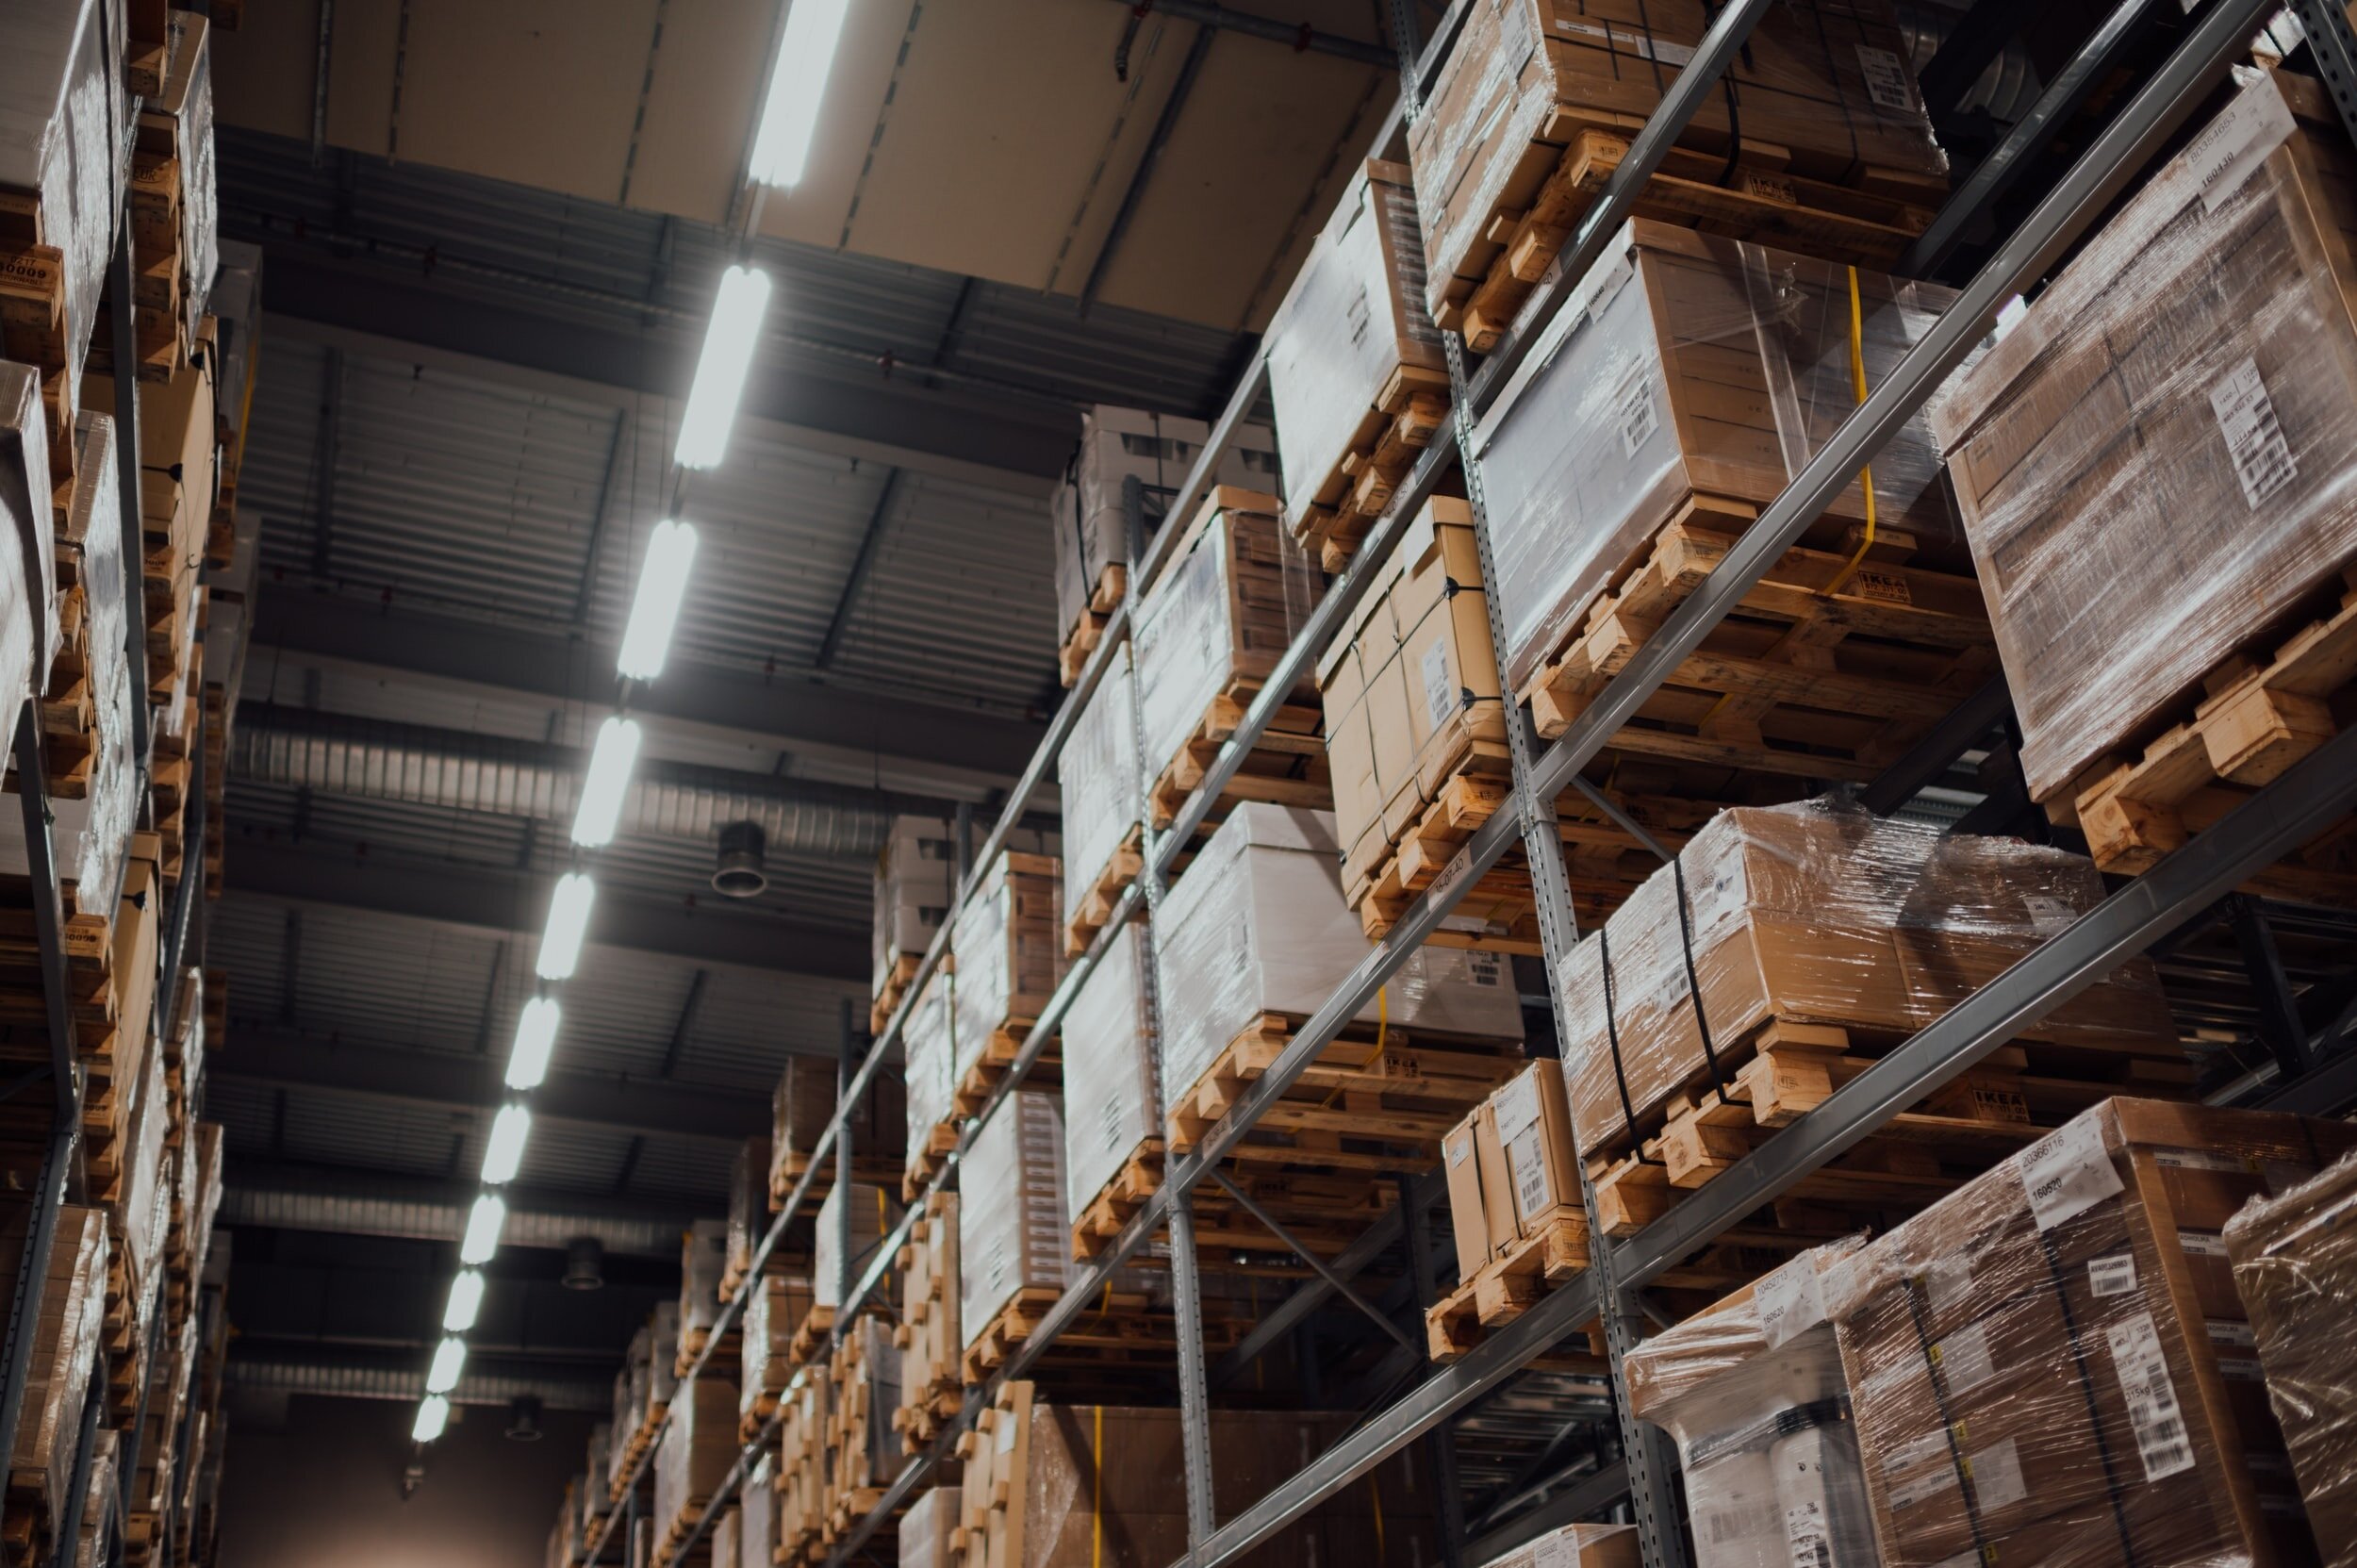 What is WMS, the basic tool for working in warehouses?